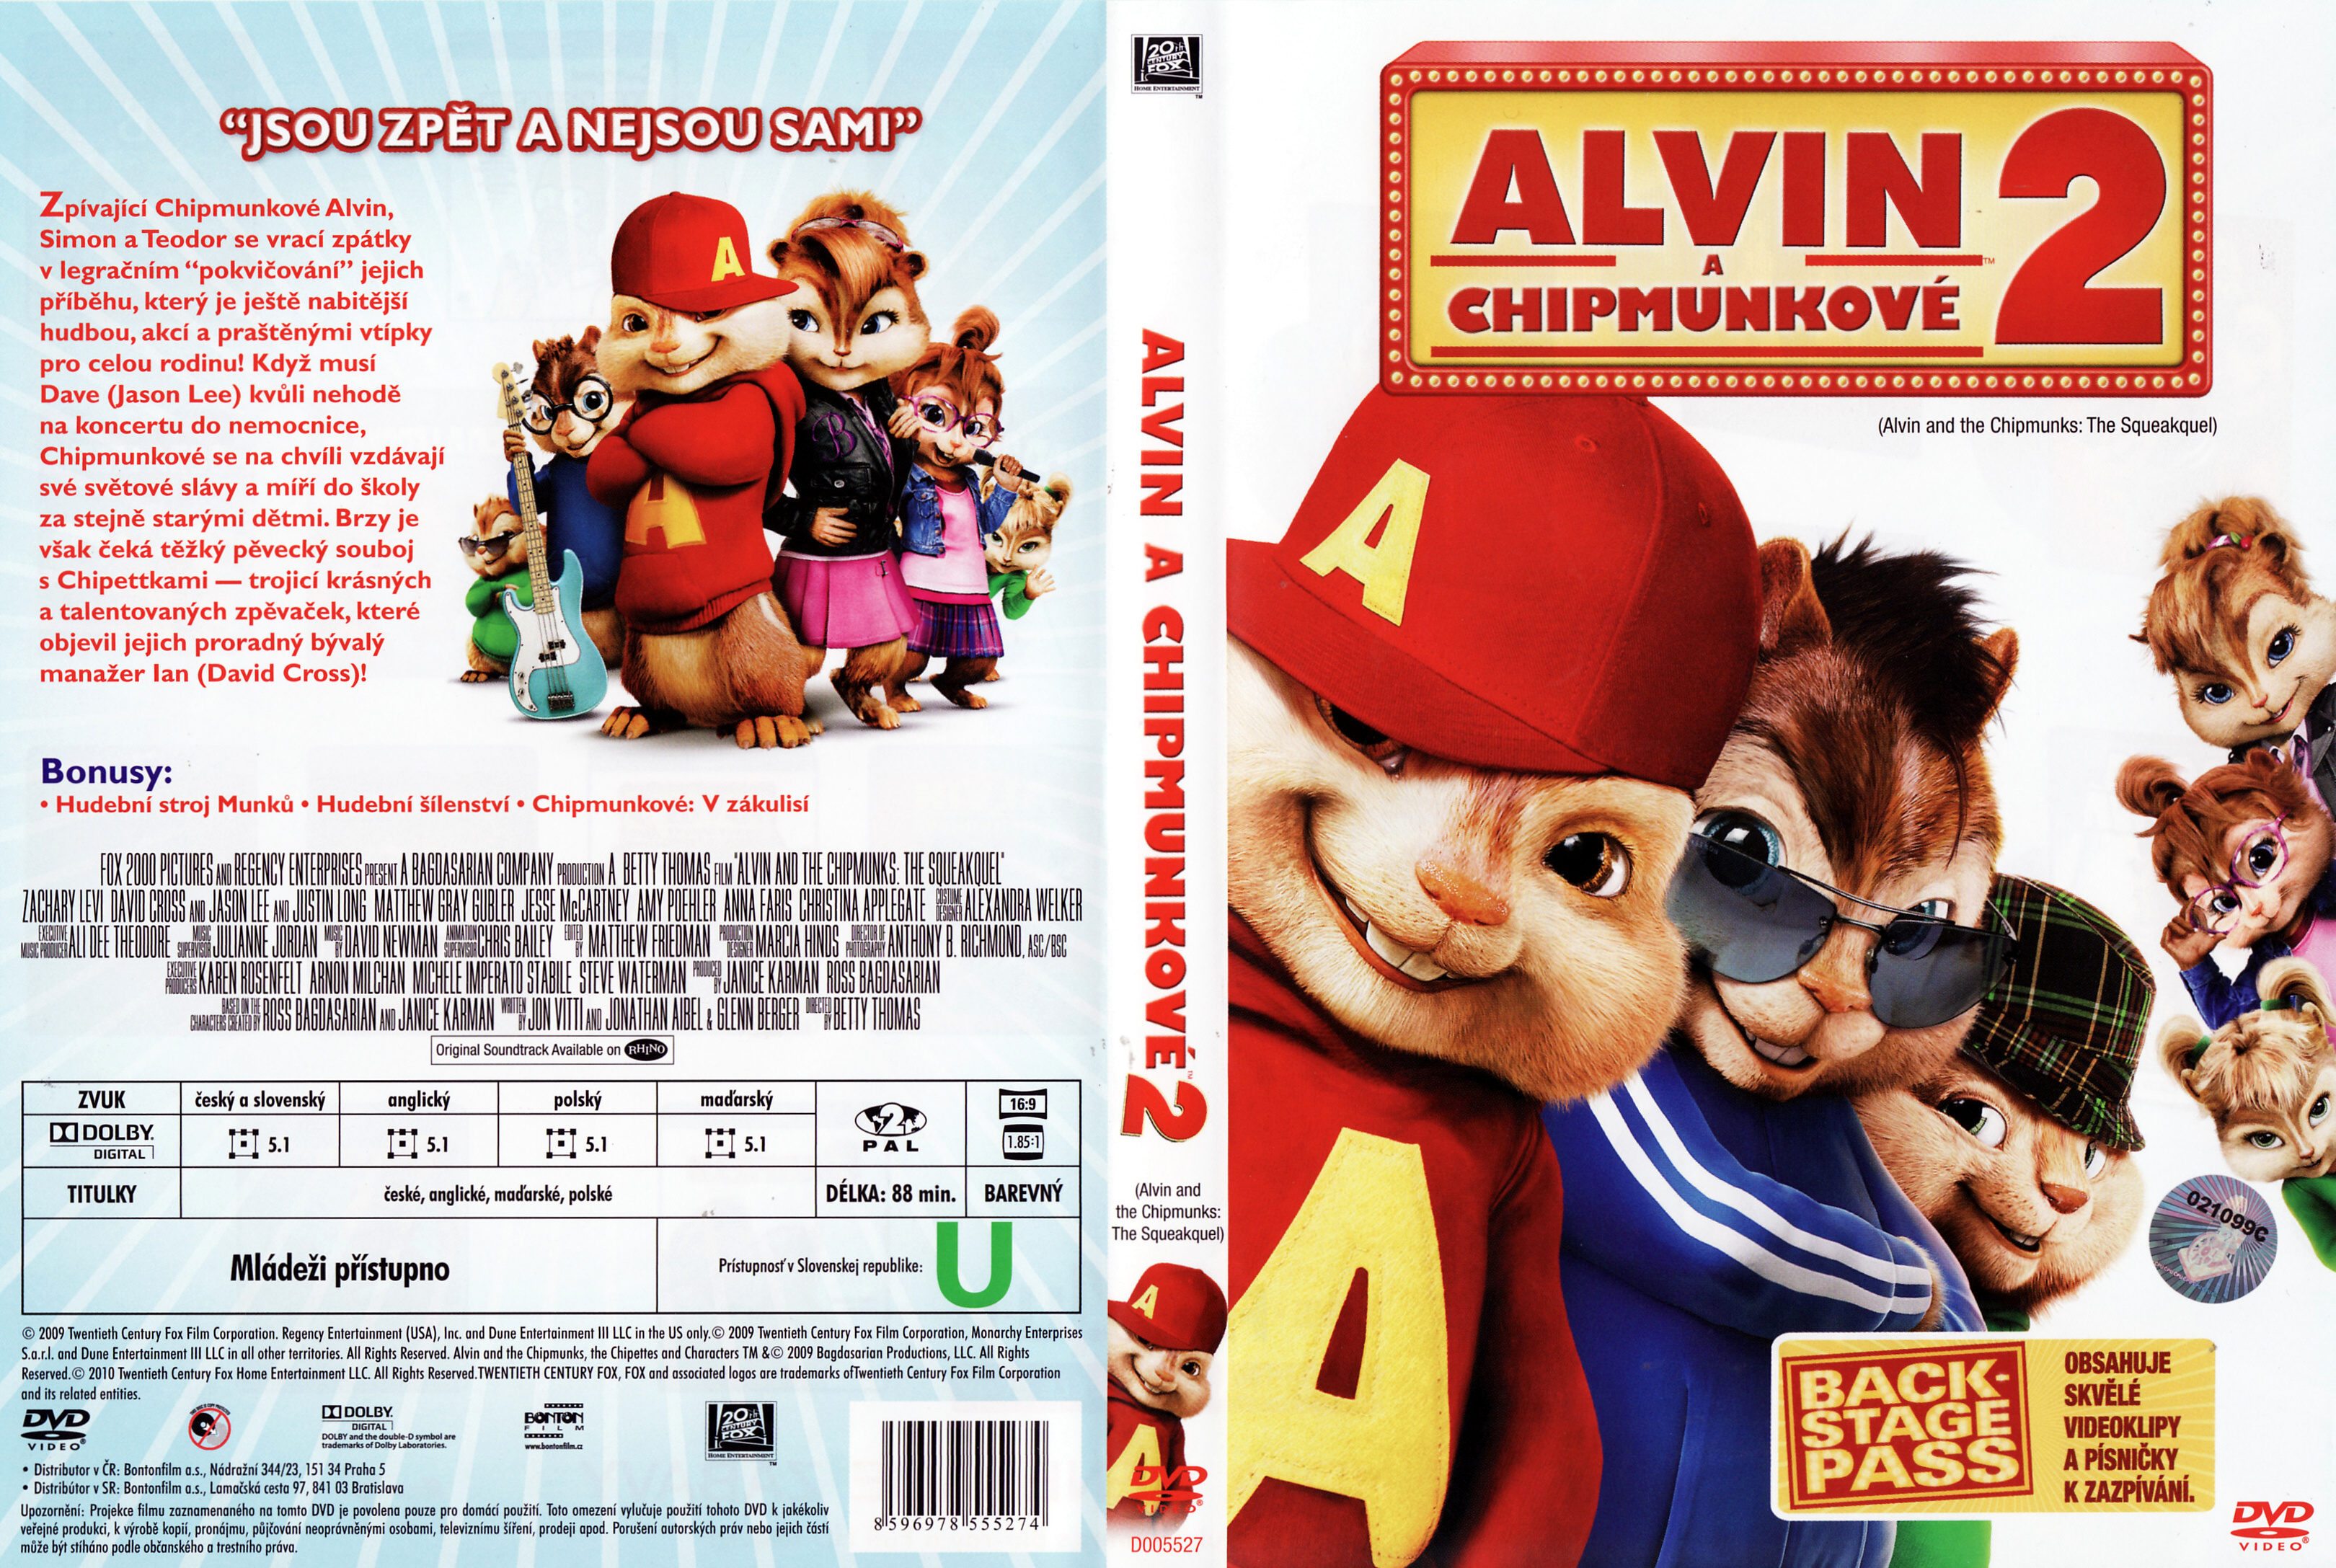 Alvin and the Chipmunks: The Squeakquel (2009) - front back.